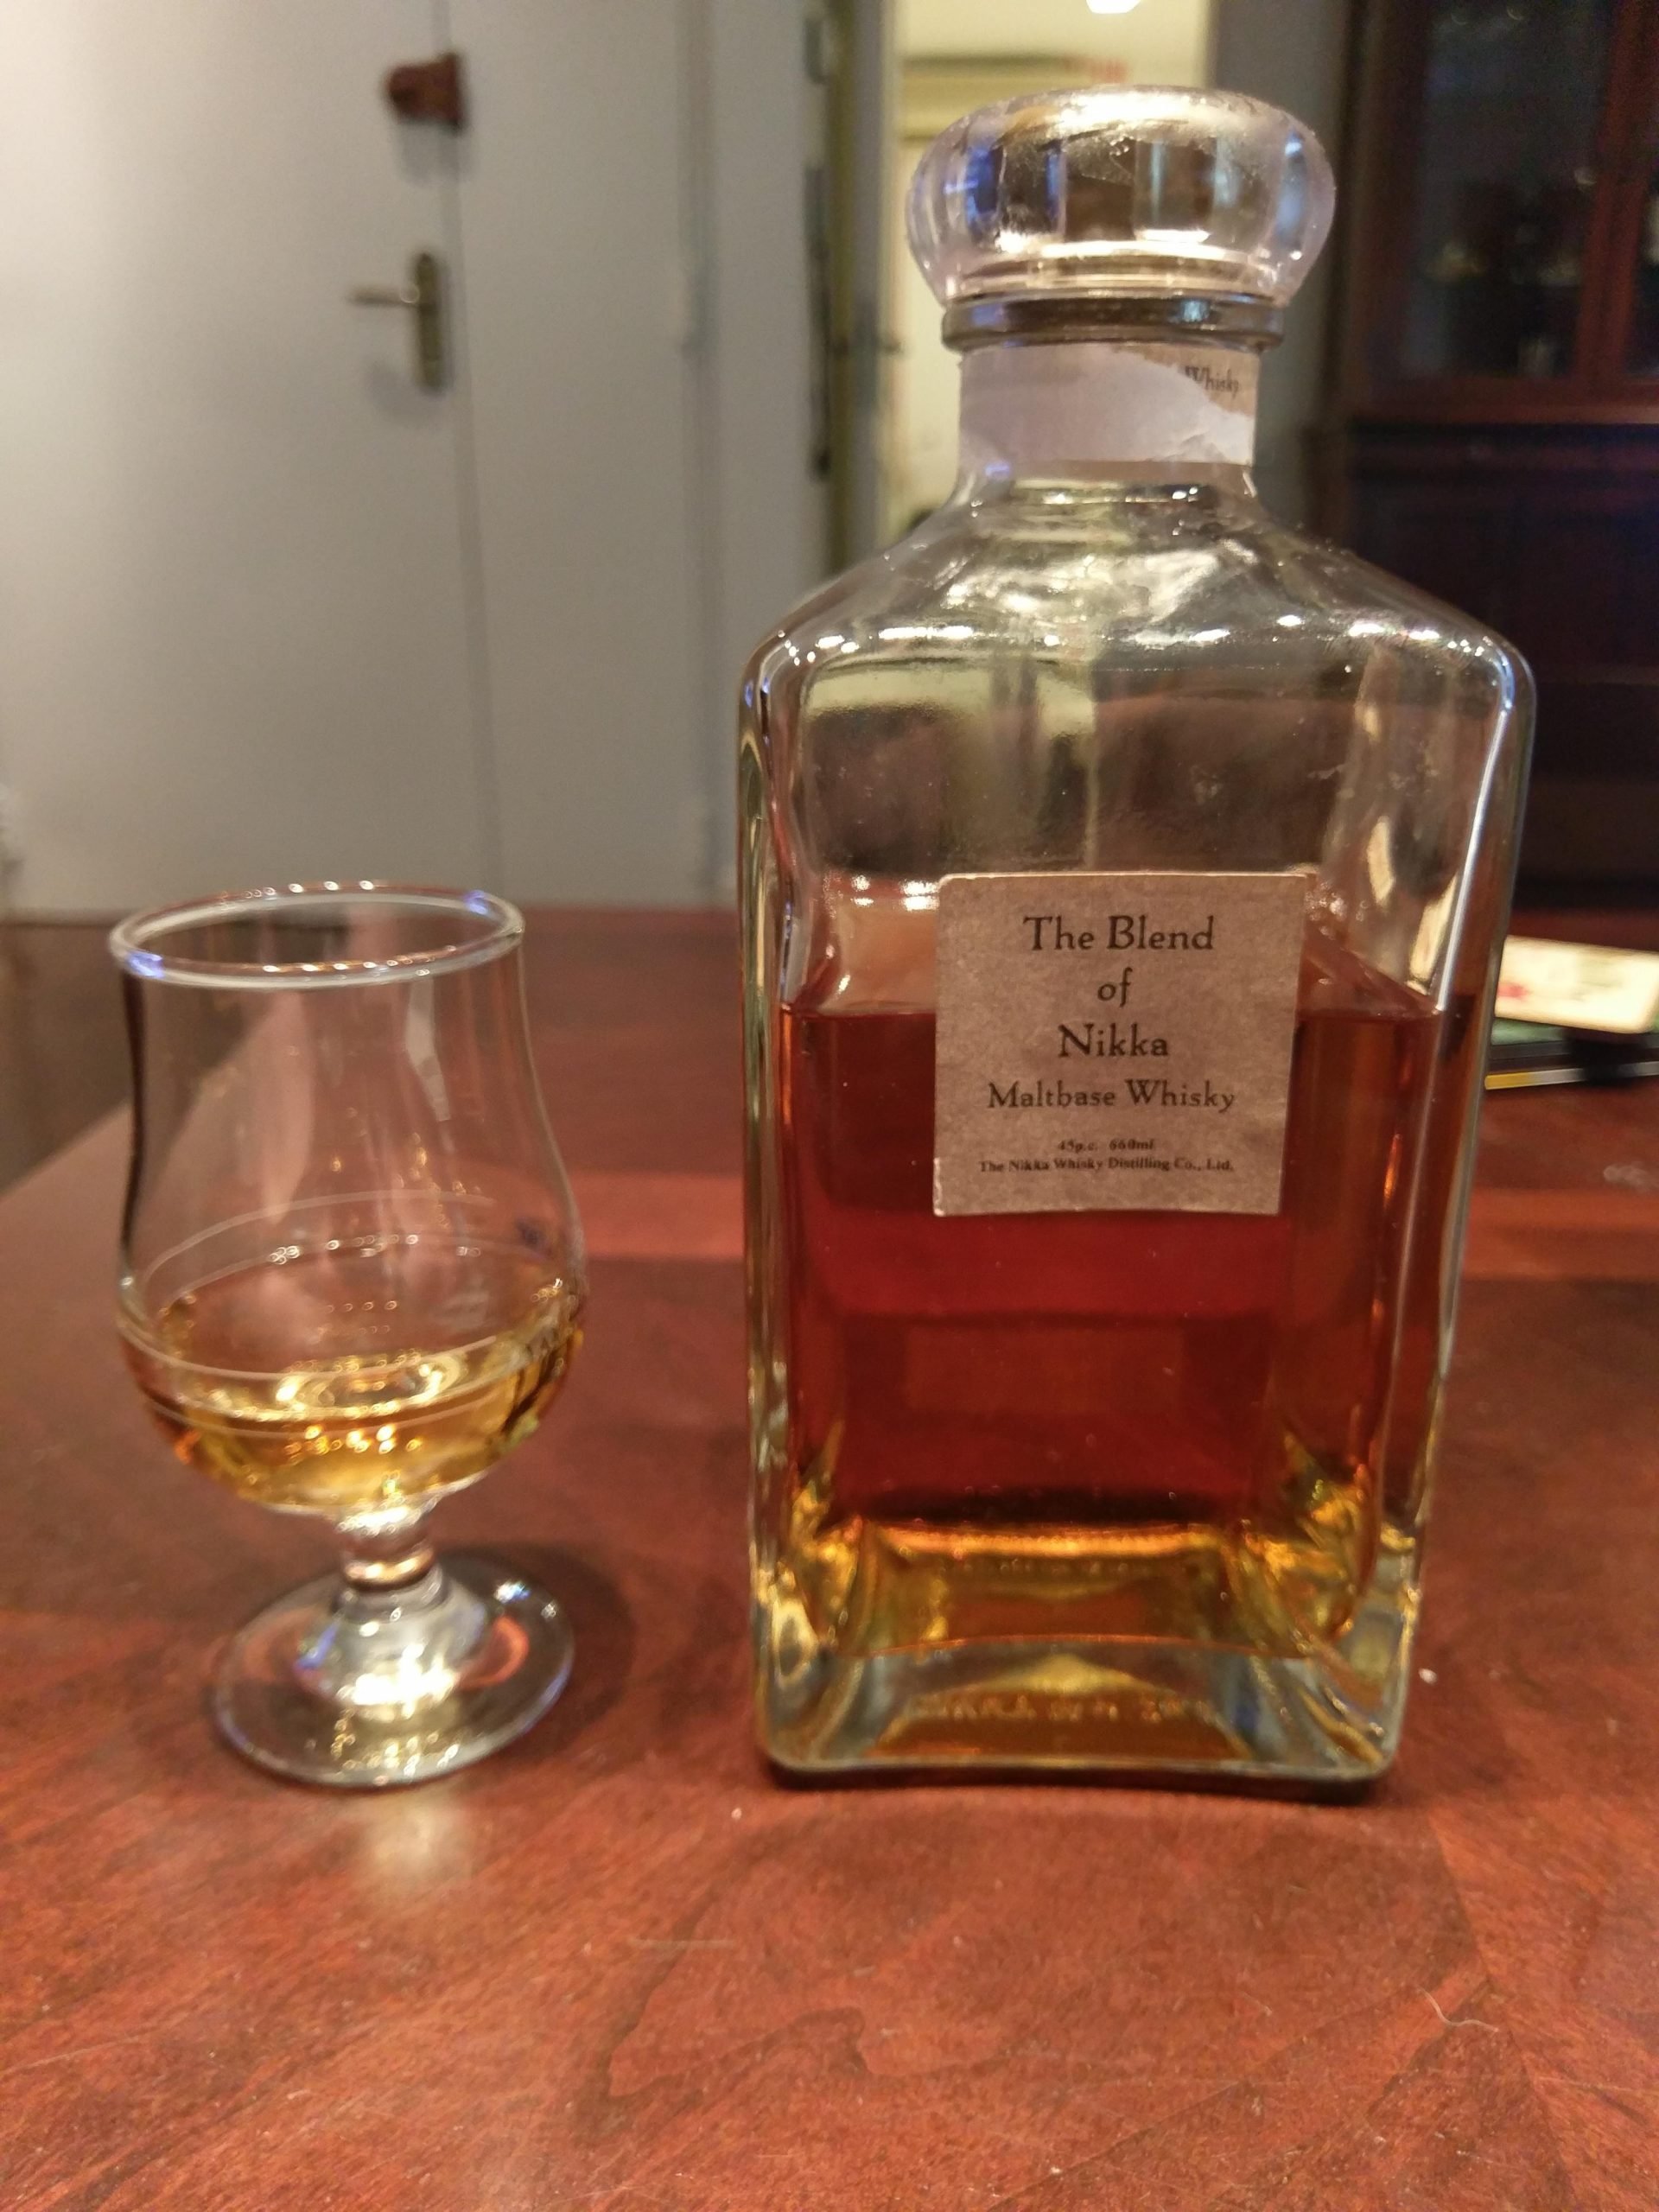 Review #31: The Blend of Nikka Maltbase Whisky : worldwhisky